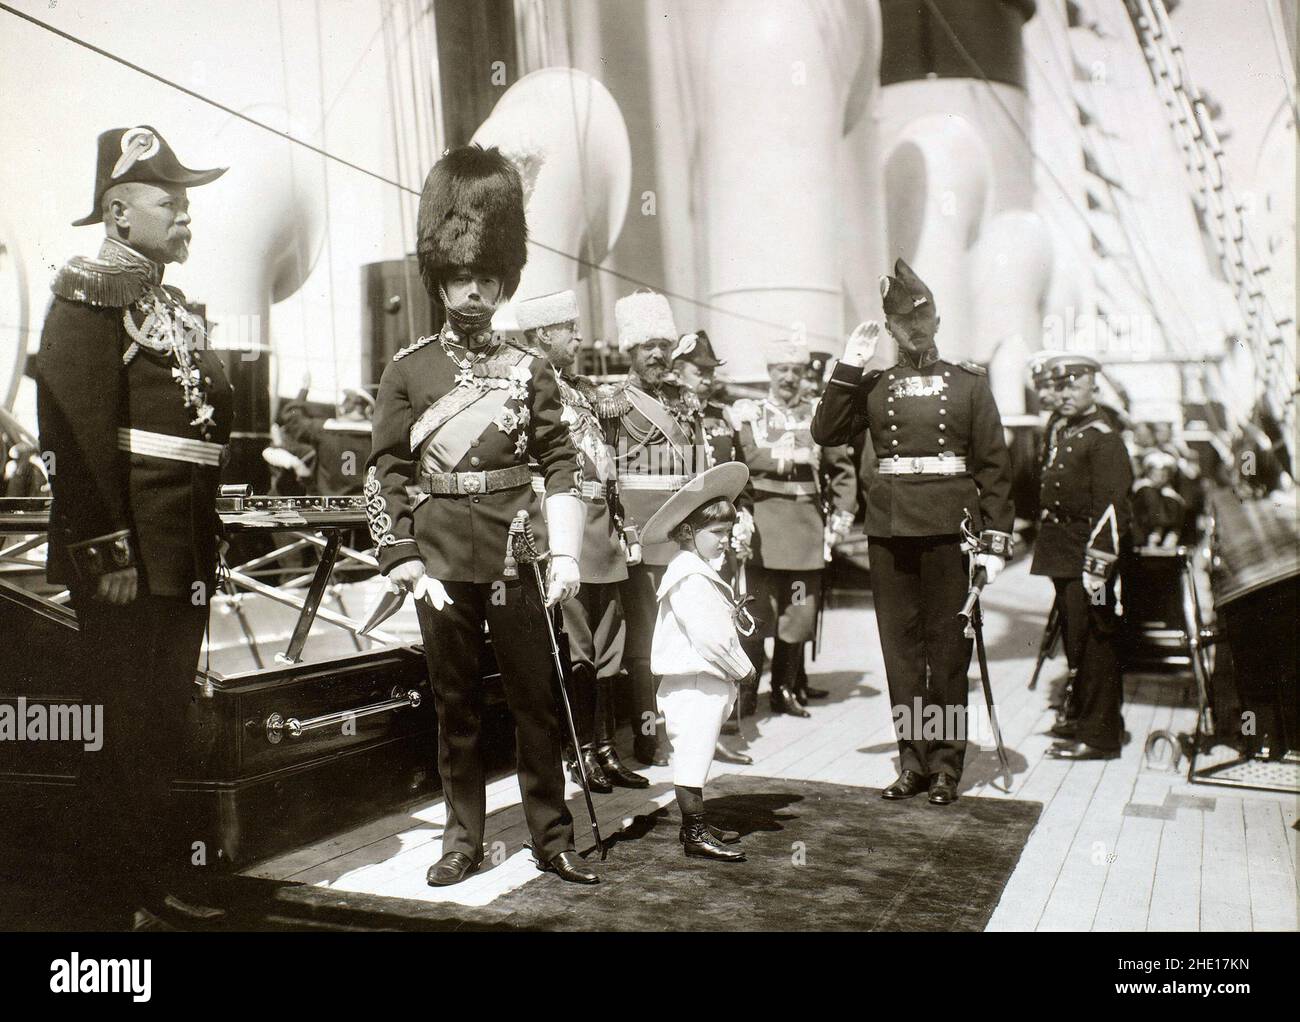 The Romanov Dynasty - Tsar Nicholas II with his son and heir Alexei in dress uniform on board the Royal Yacht Standart at Reval during King Edwards VII's June 1908 state visit to Russia Stock Photo